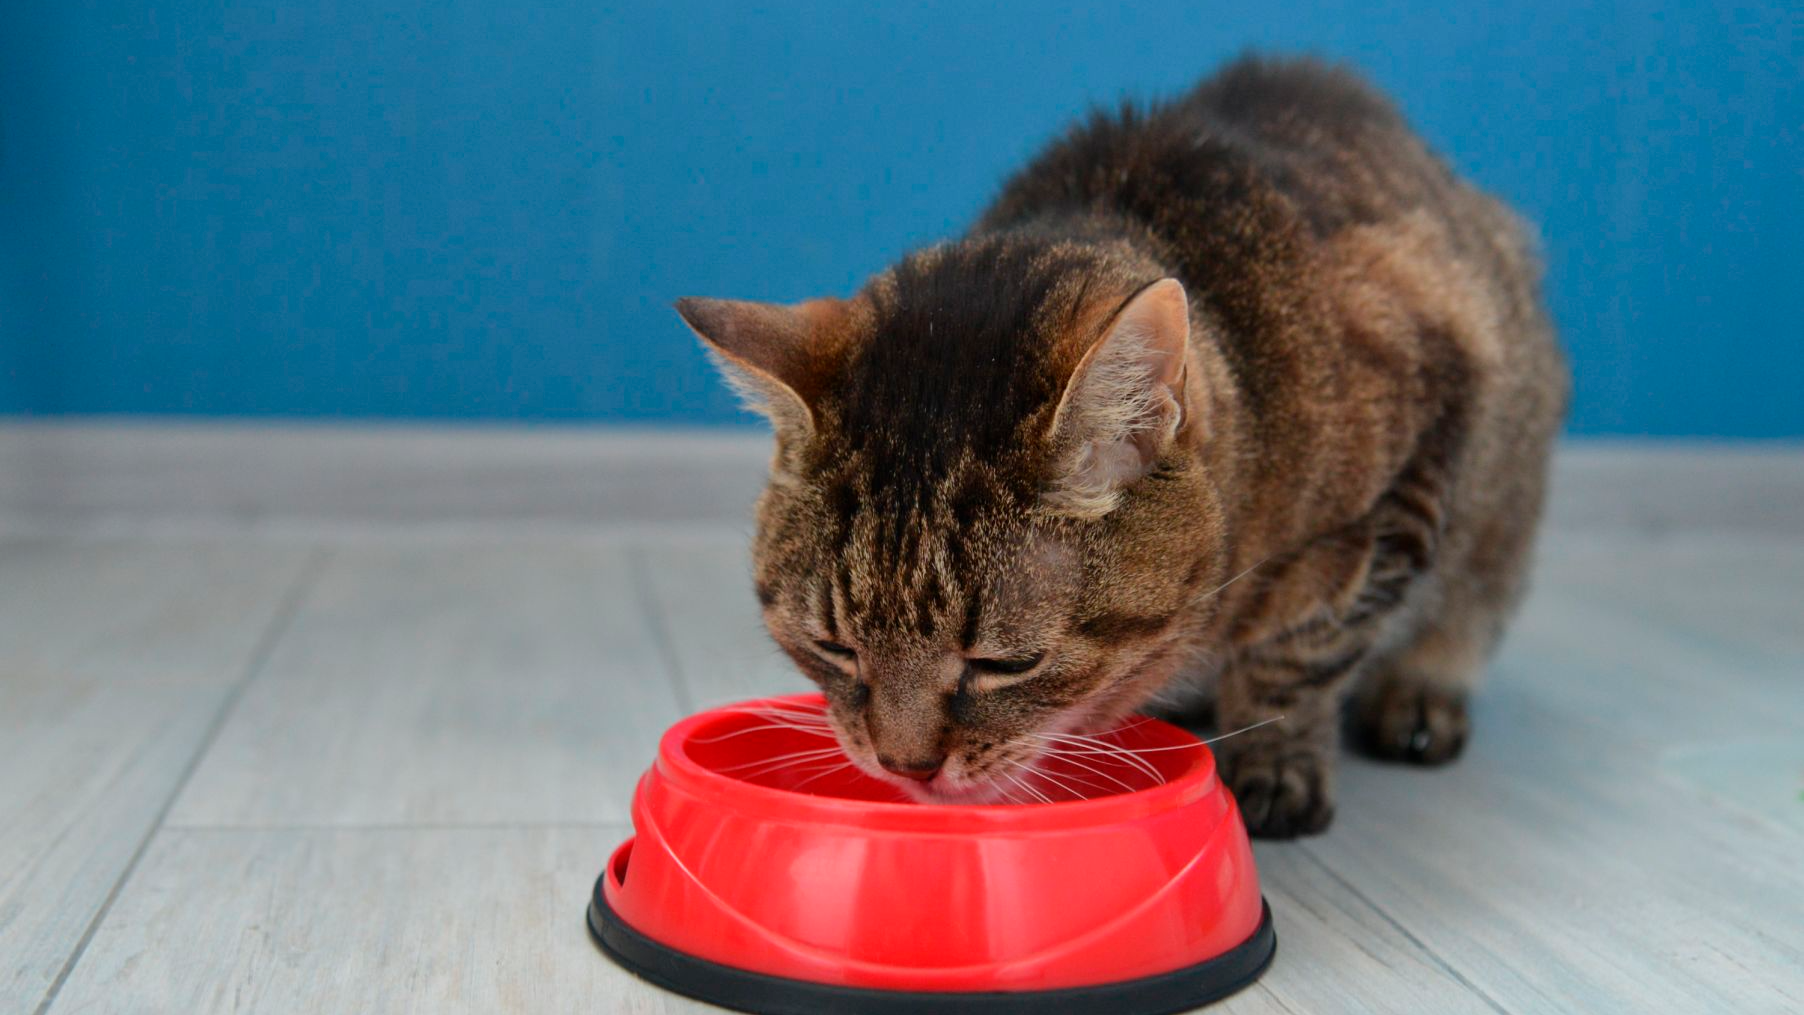 domestic cat eats from a red bowl